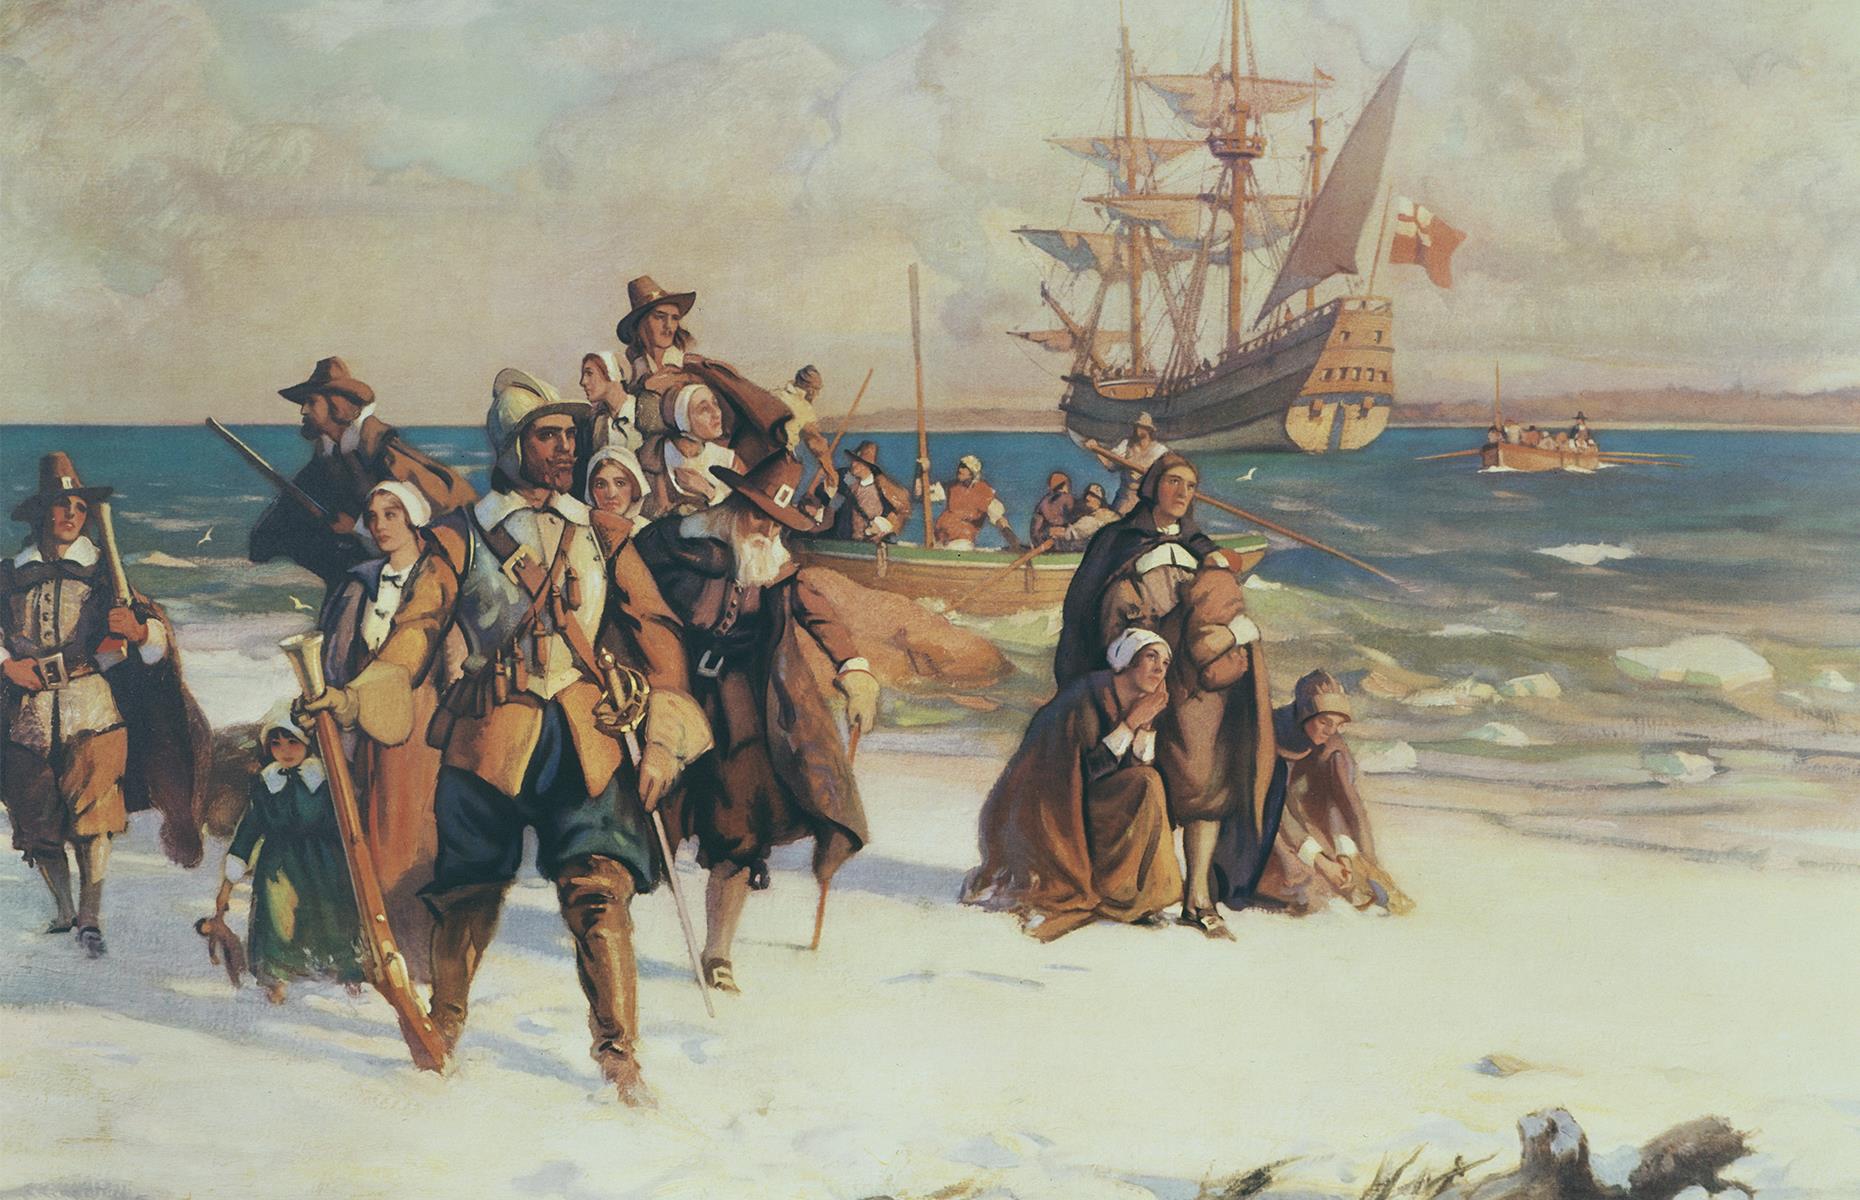 The Incredible Story of the Mayflower: The Ship That Changed America